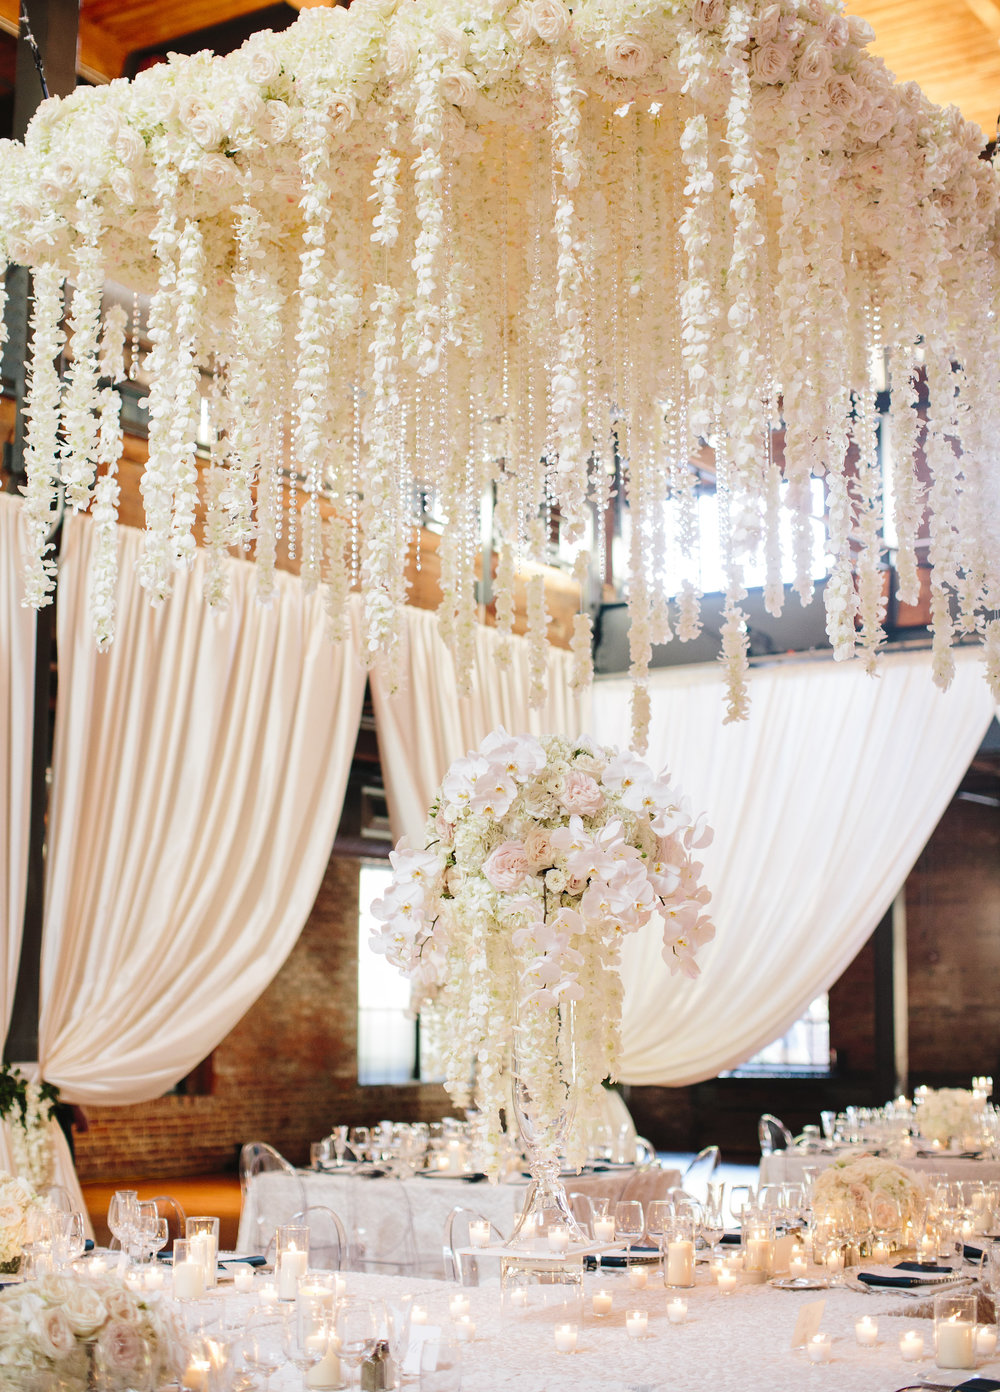 Stunning white floral cascade overhang over head table